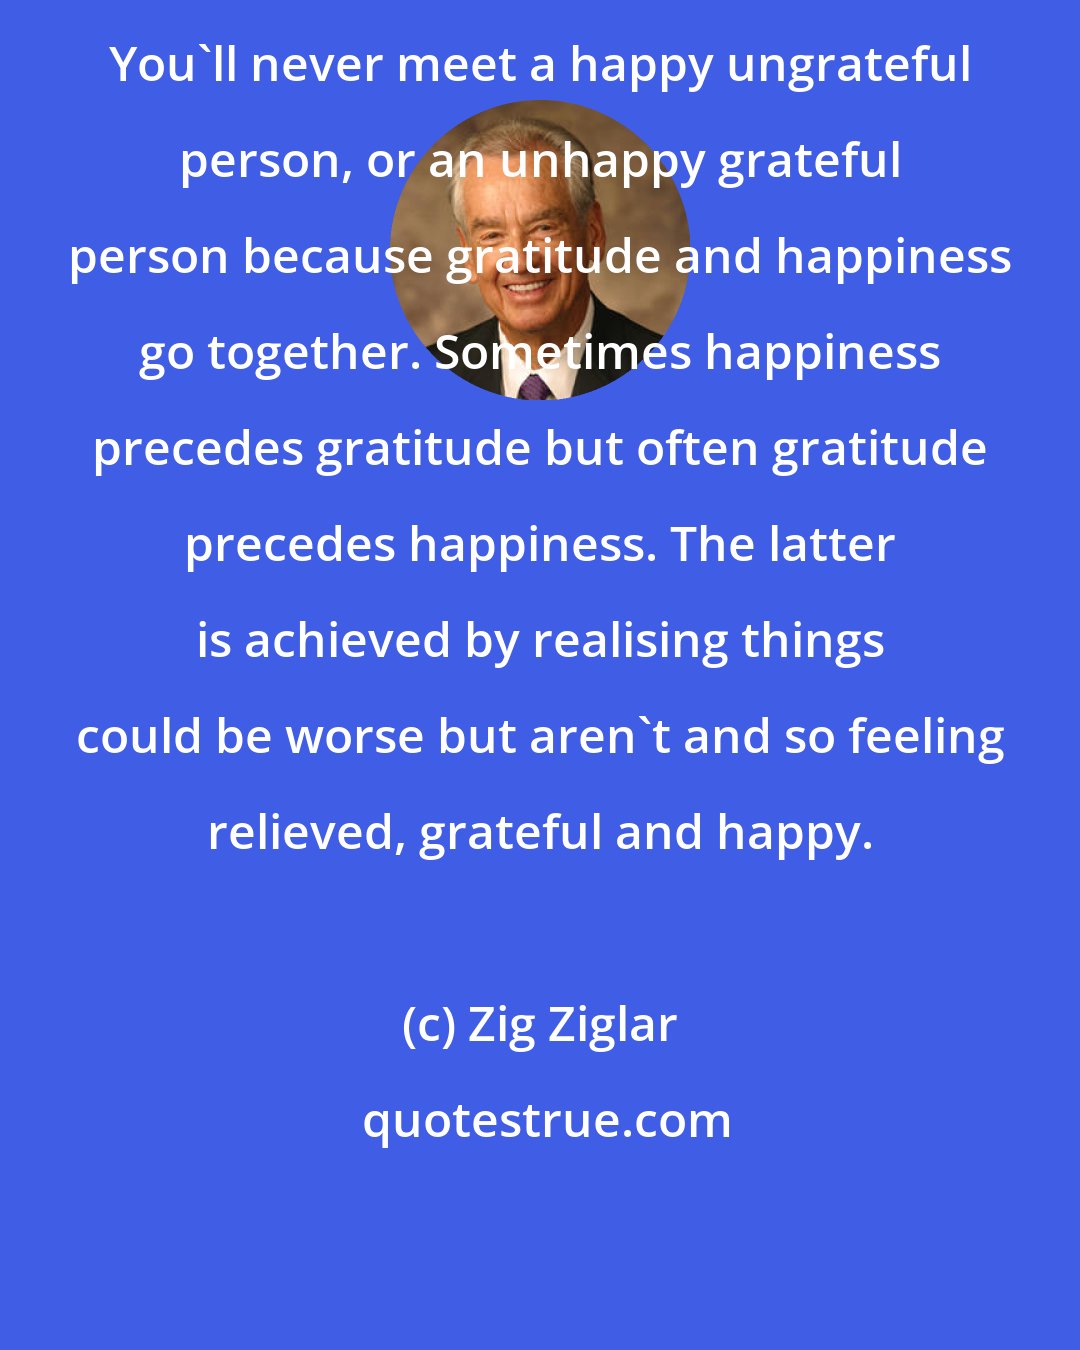 Zig Ziglar: You'll never meet a happy ungrateful person, or an unhappy grateful person because gratitude and happiness go together. Sometimes happiness precedes gratitude but often gratitude precedes happiness. The latter is achieved by realising things could be worse but aren't and so feeling relieved, grateful and happy.